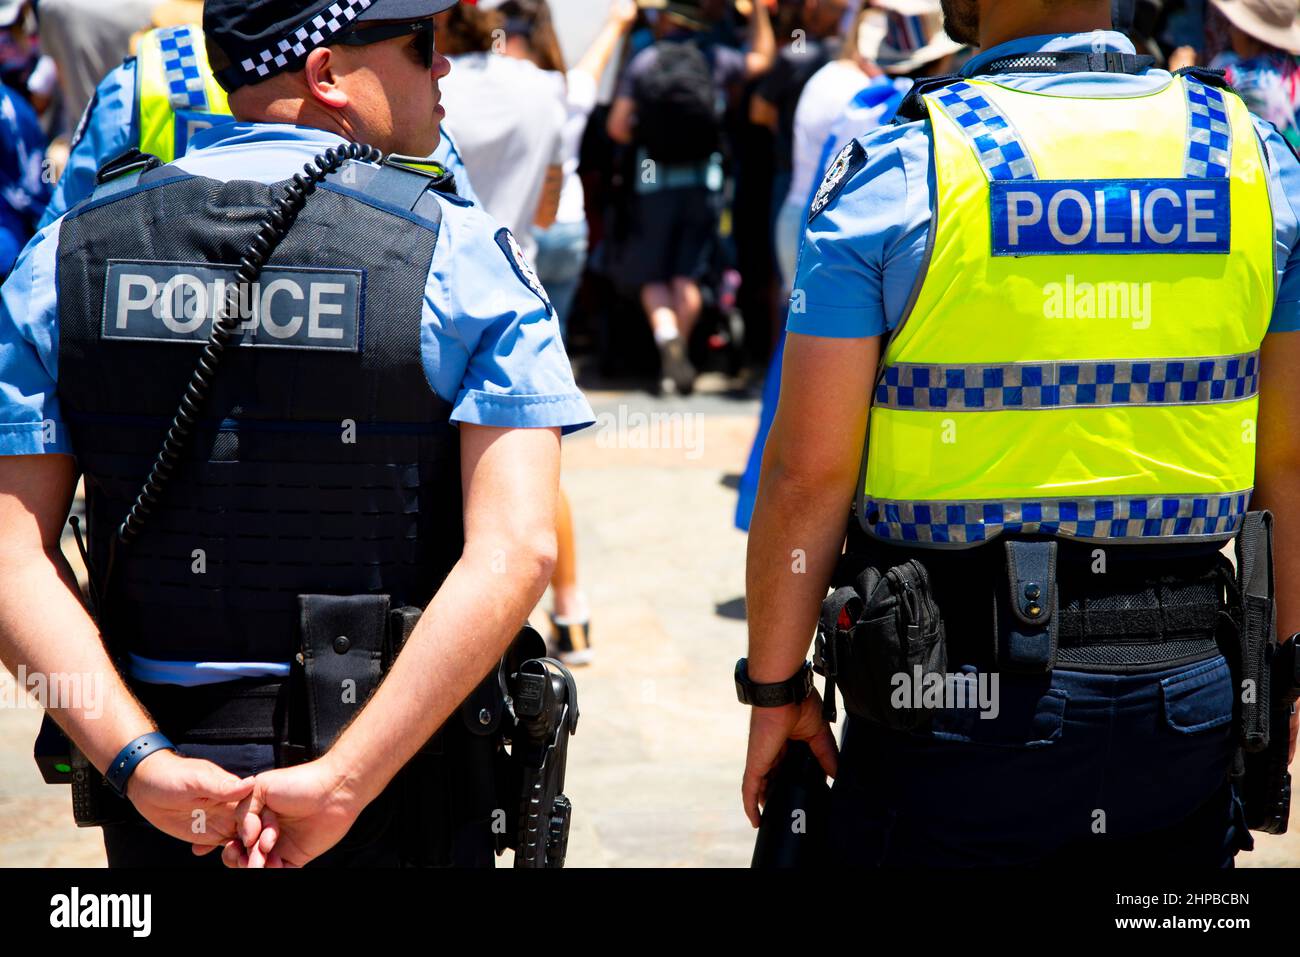 Perth, Australia - November 20, 2021: Police patrolling during the freedom rally protest against vaccine mandates Stock Photo